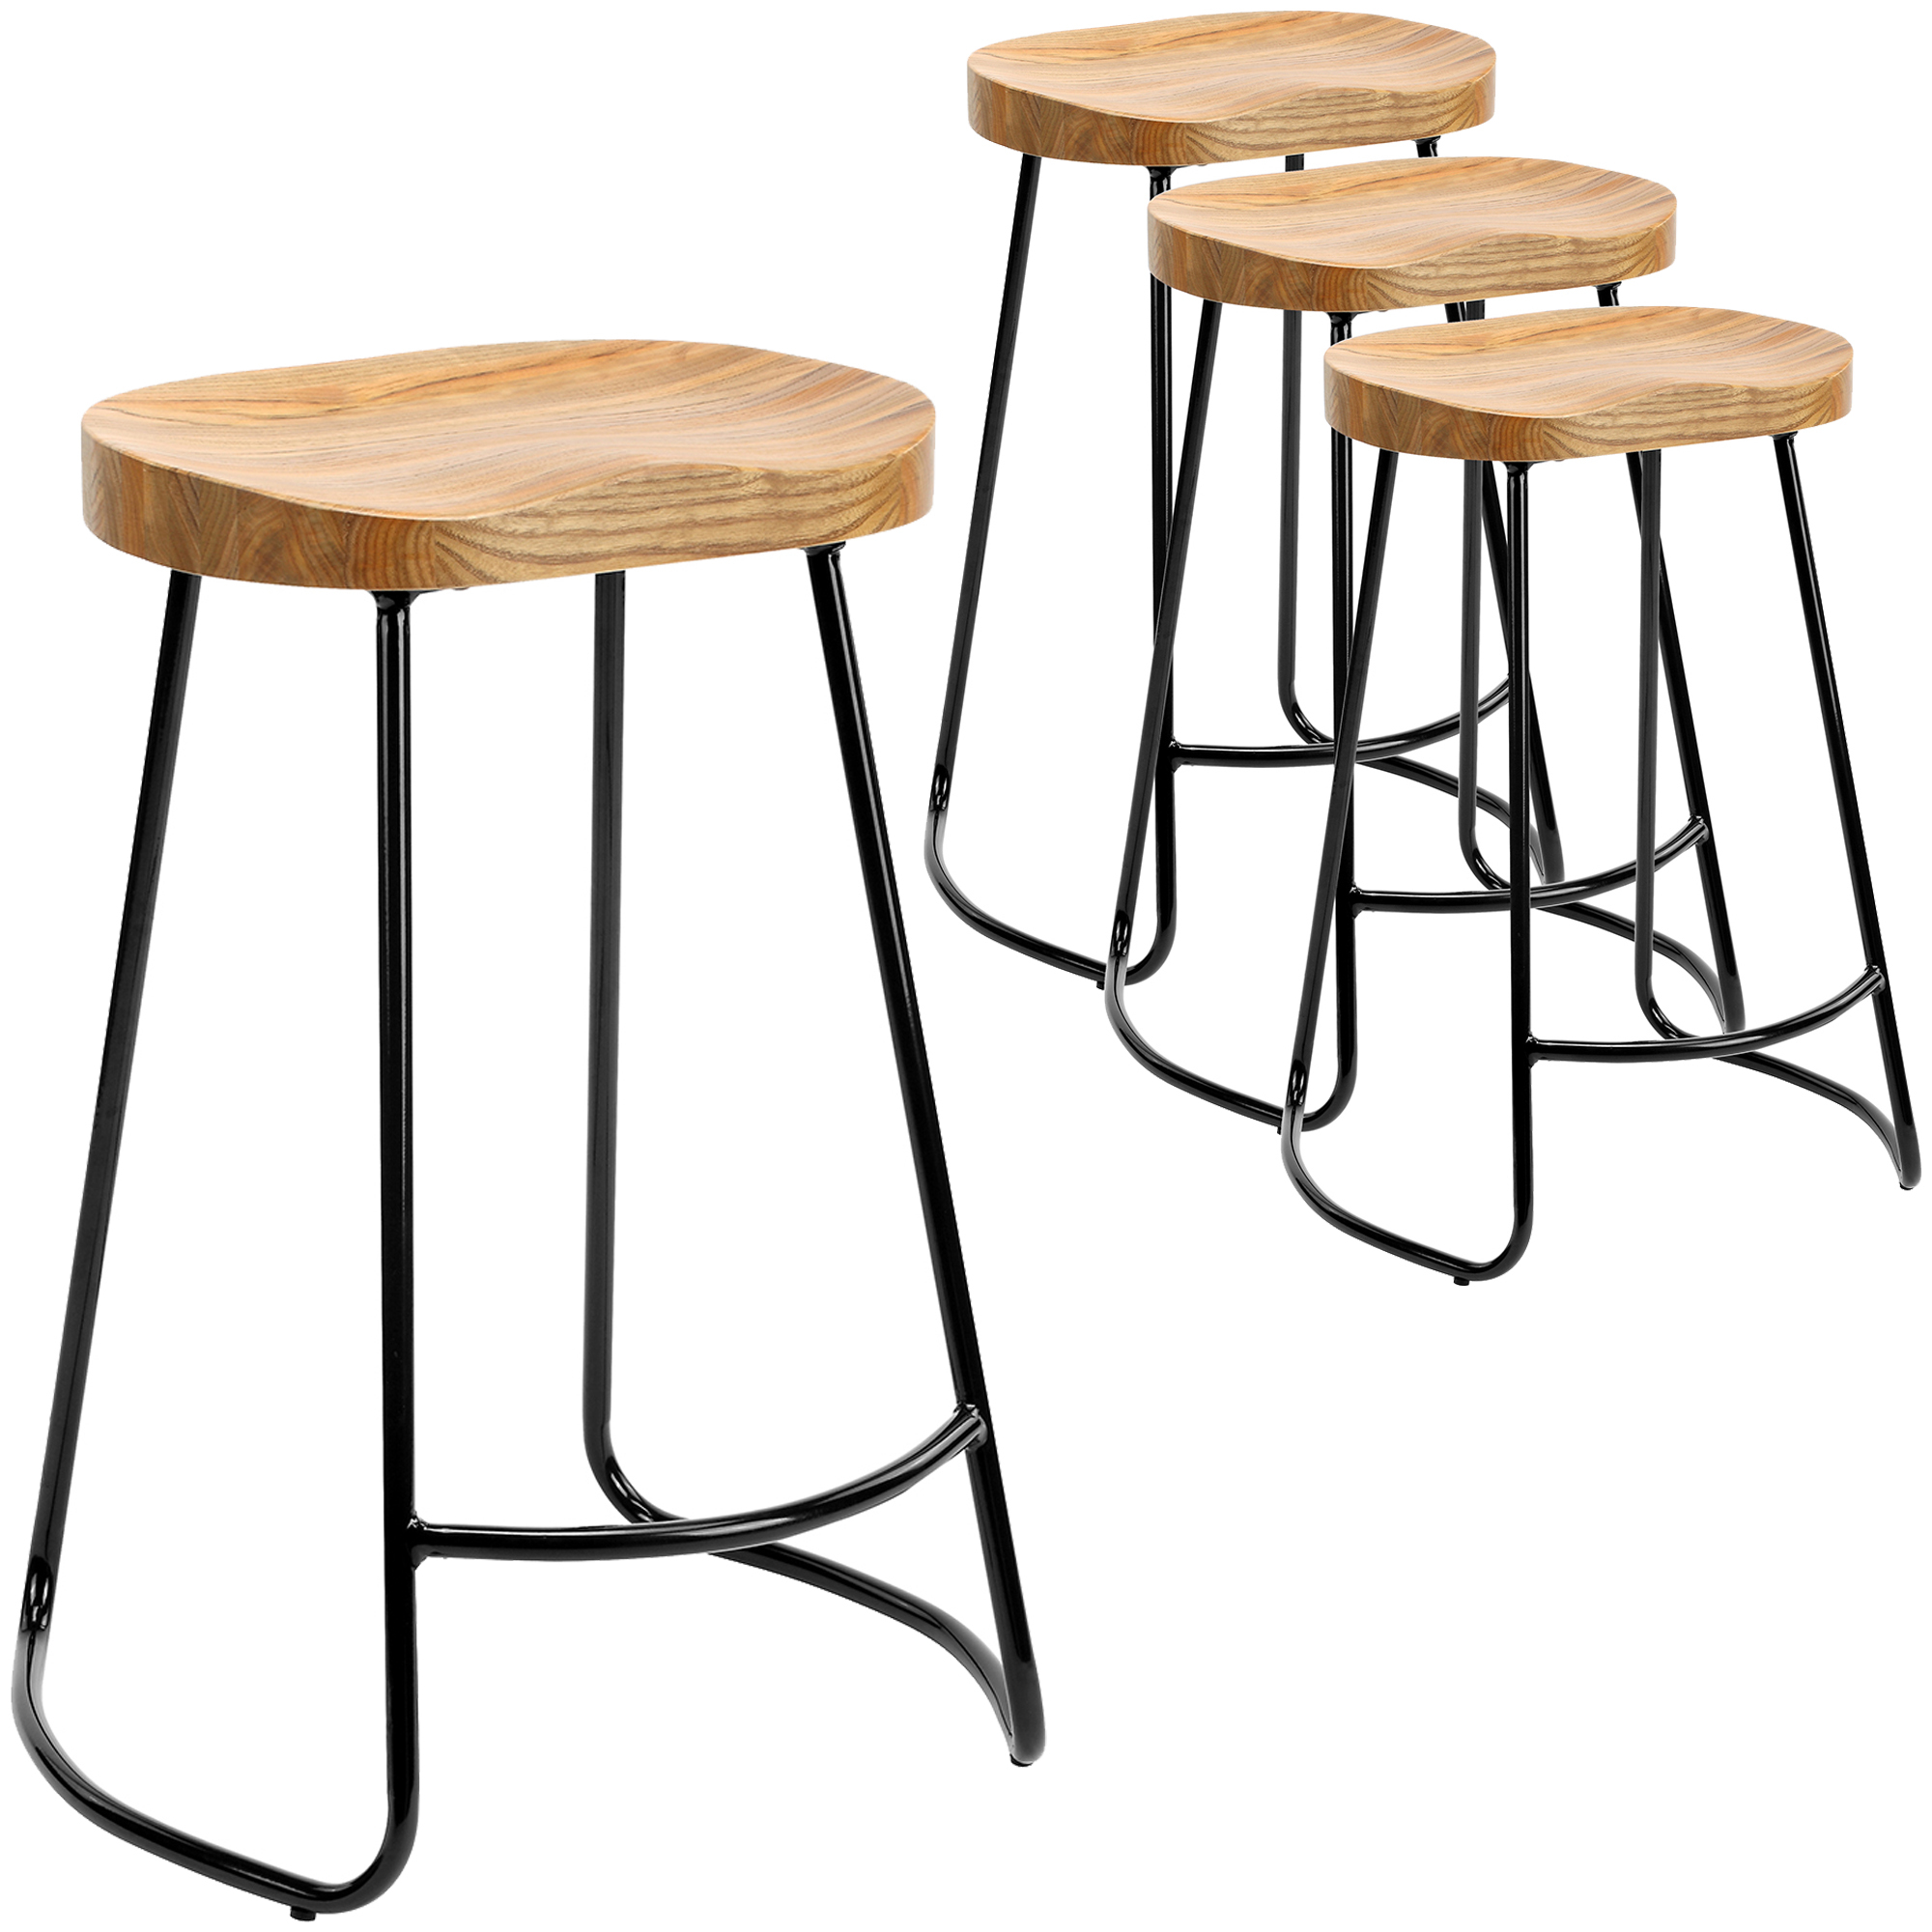 Elm Wood Barstools With Black Legs, How Much Space For 4 Bar Stools